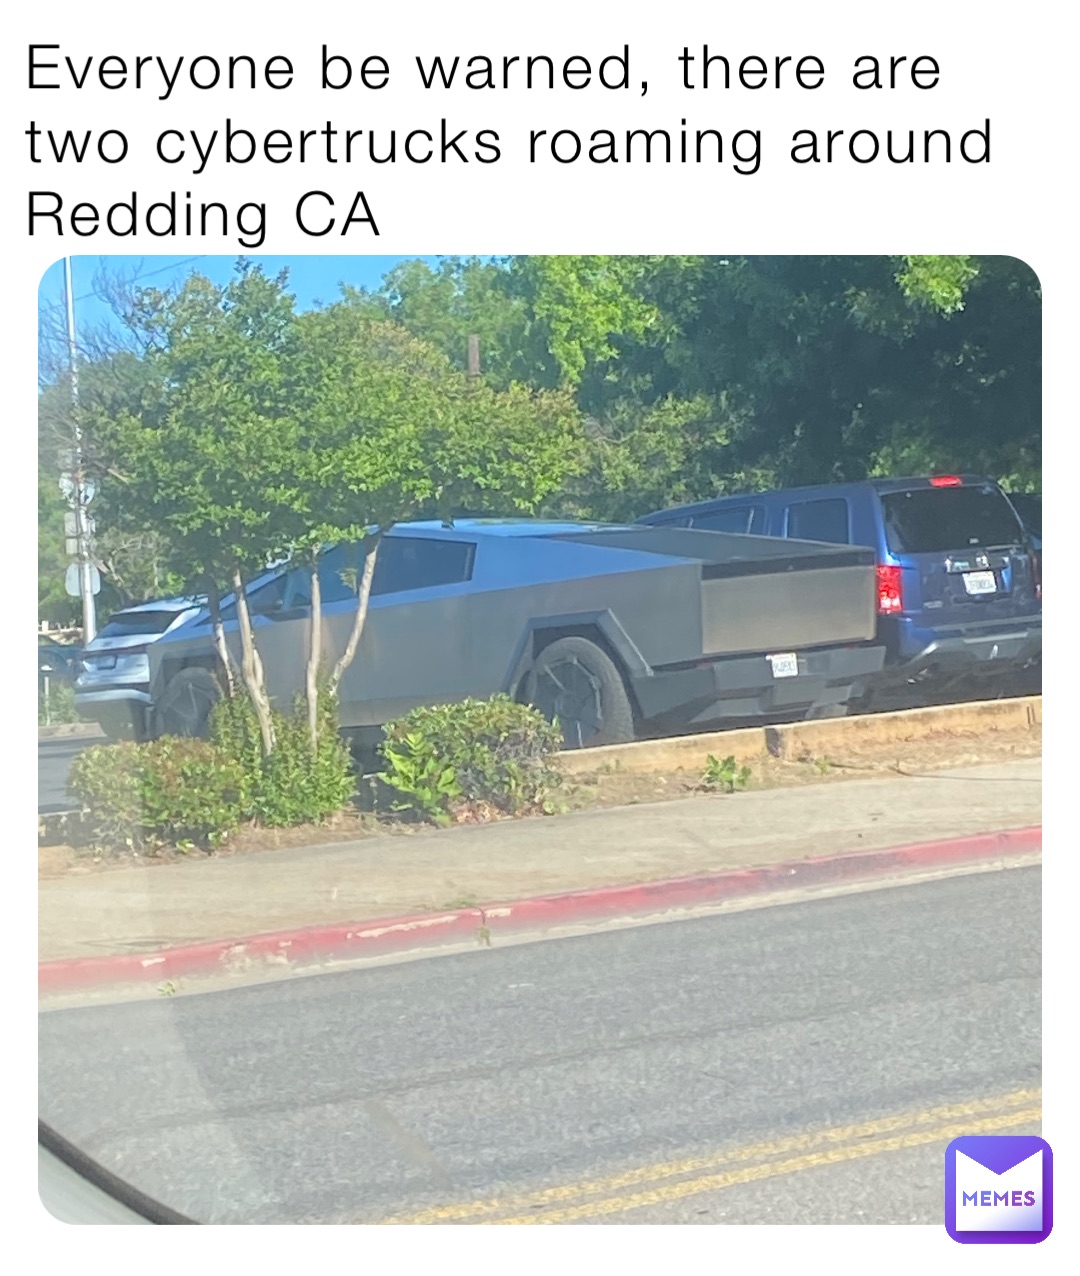 Everyone be warned, there are two cybertrucks roaming around Redding CA